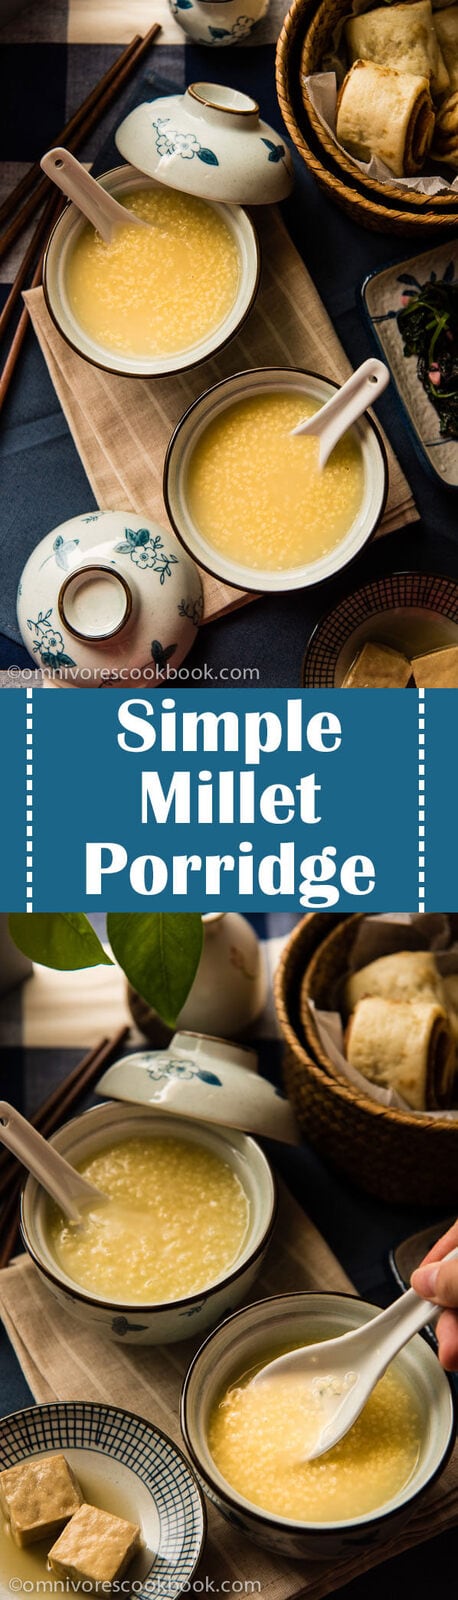 Millet Porridge - an easy, comforting, and versatile side that takes only 30 minutes to make | omnivorescookbook.com